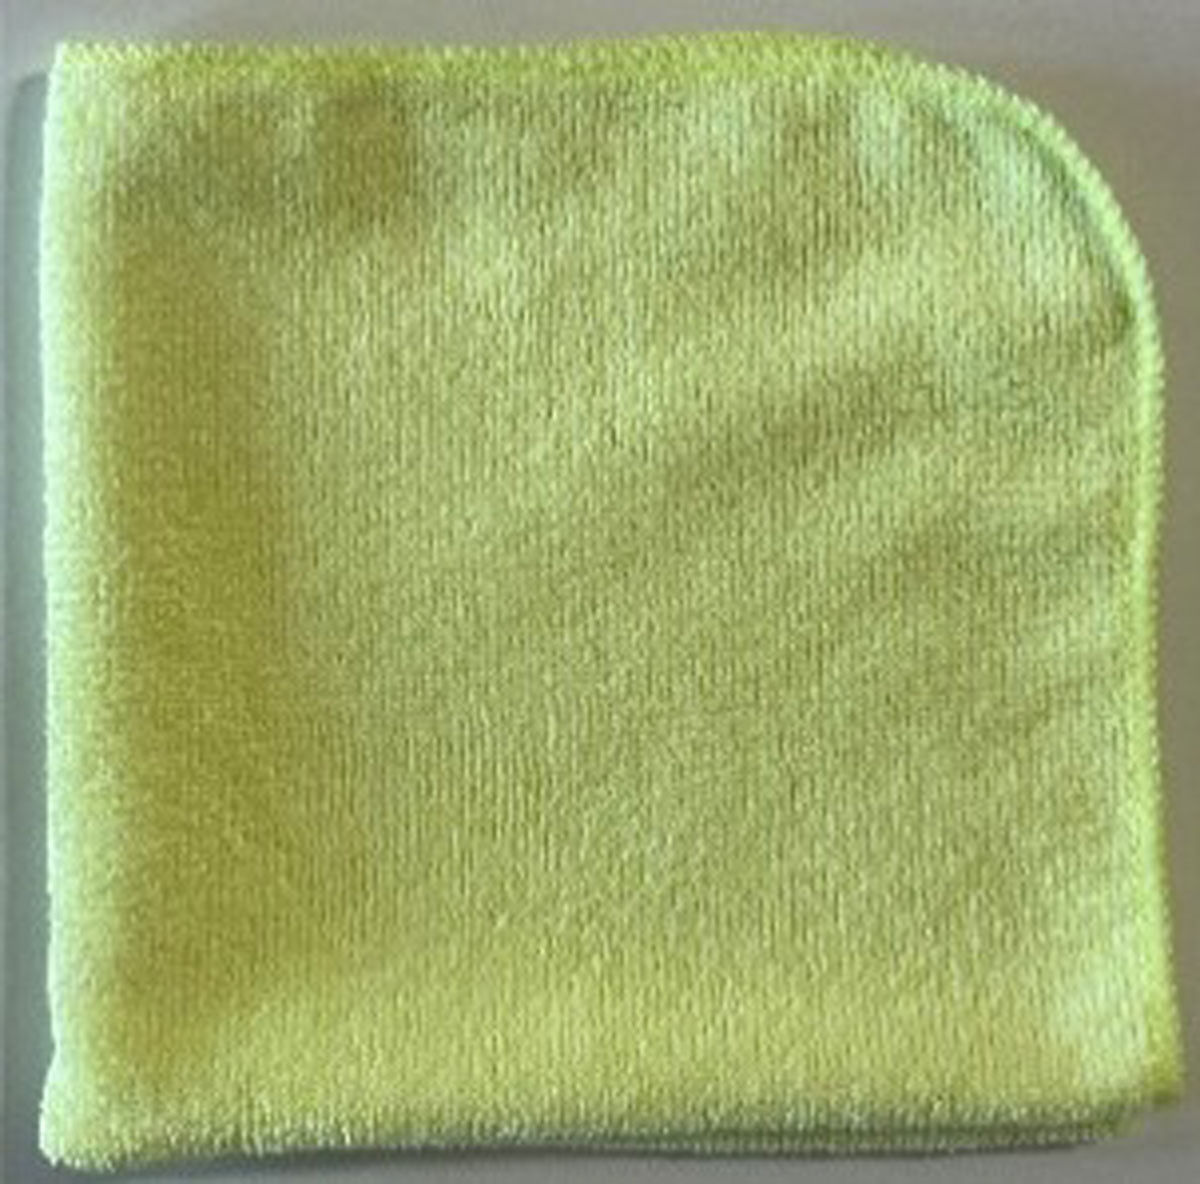 Are these microfiber cloths suitable for both indoor and outdoor use?